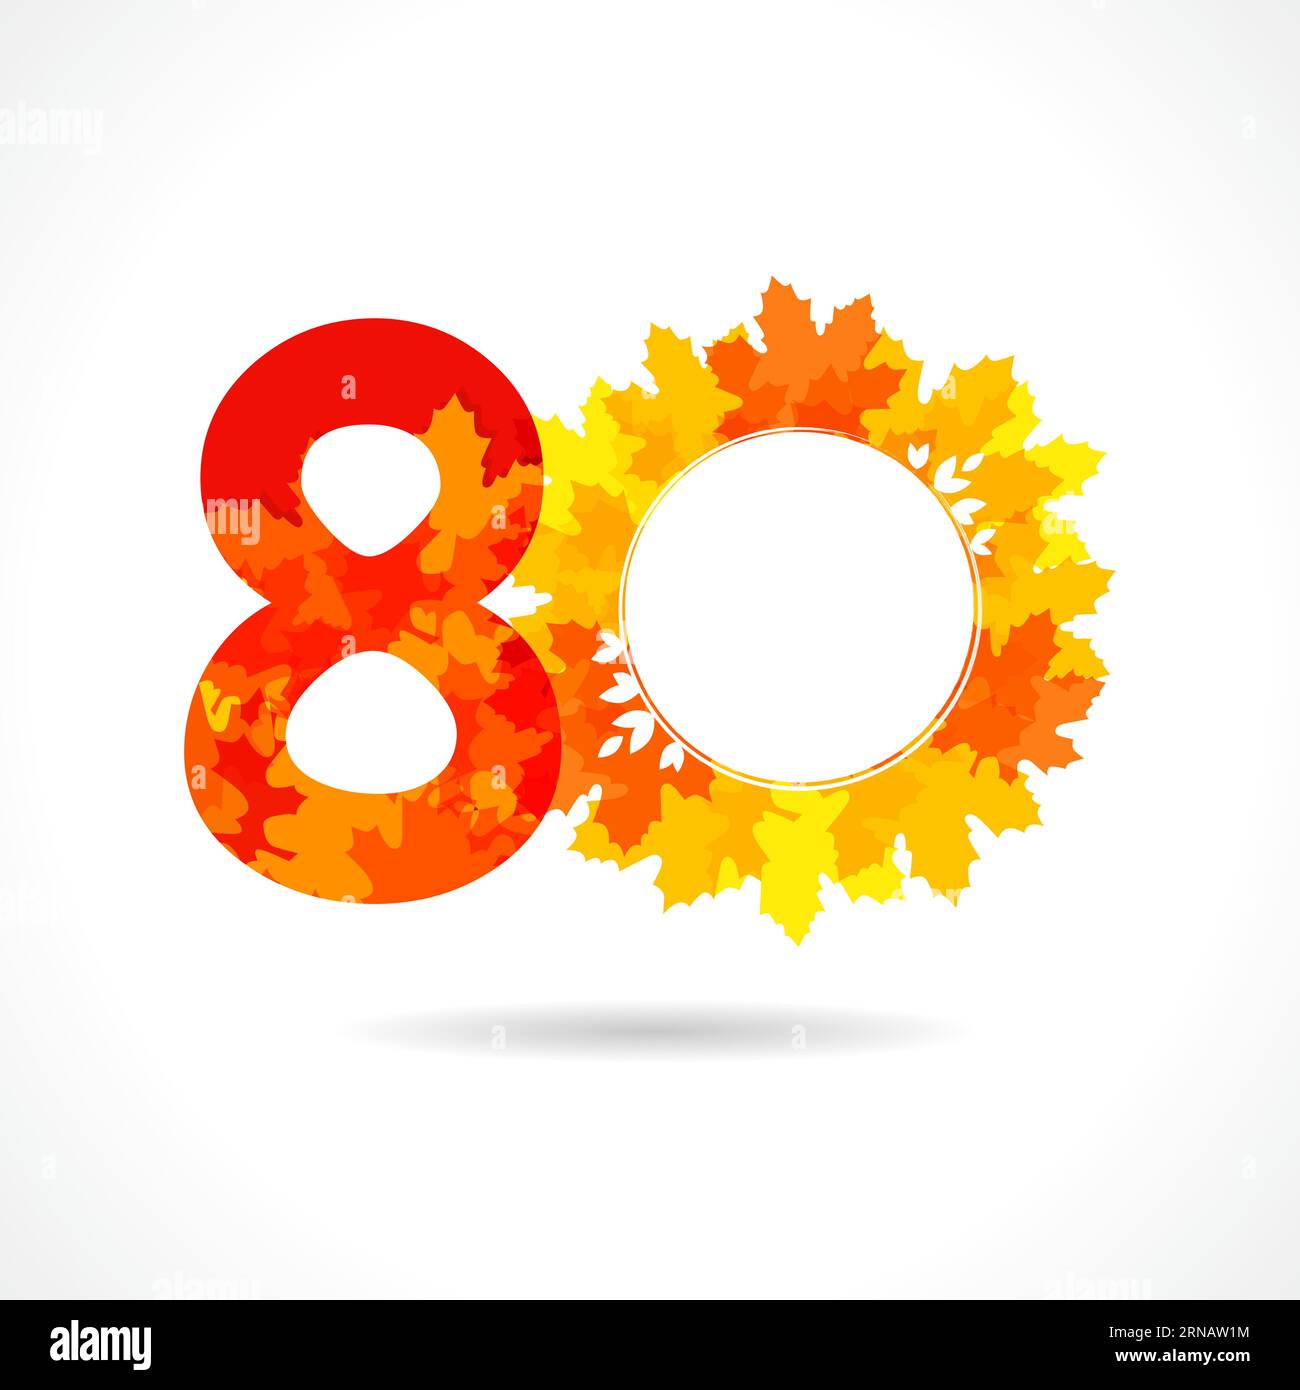 Creative number 80. Autumn sale sign concept. 80 years old logo. 80th anniversary icon with fall leaves. Seasonal symbol with red, yellow and orange Stock Vector